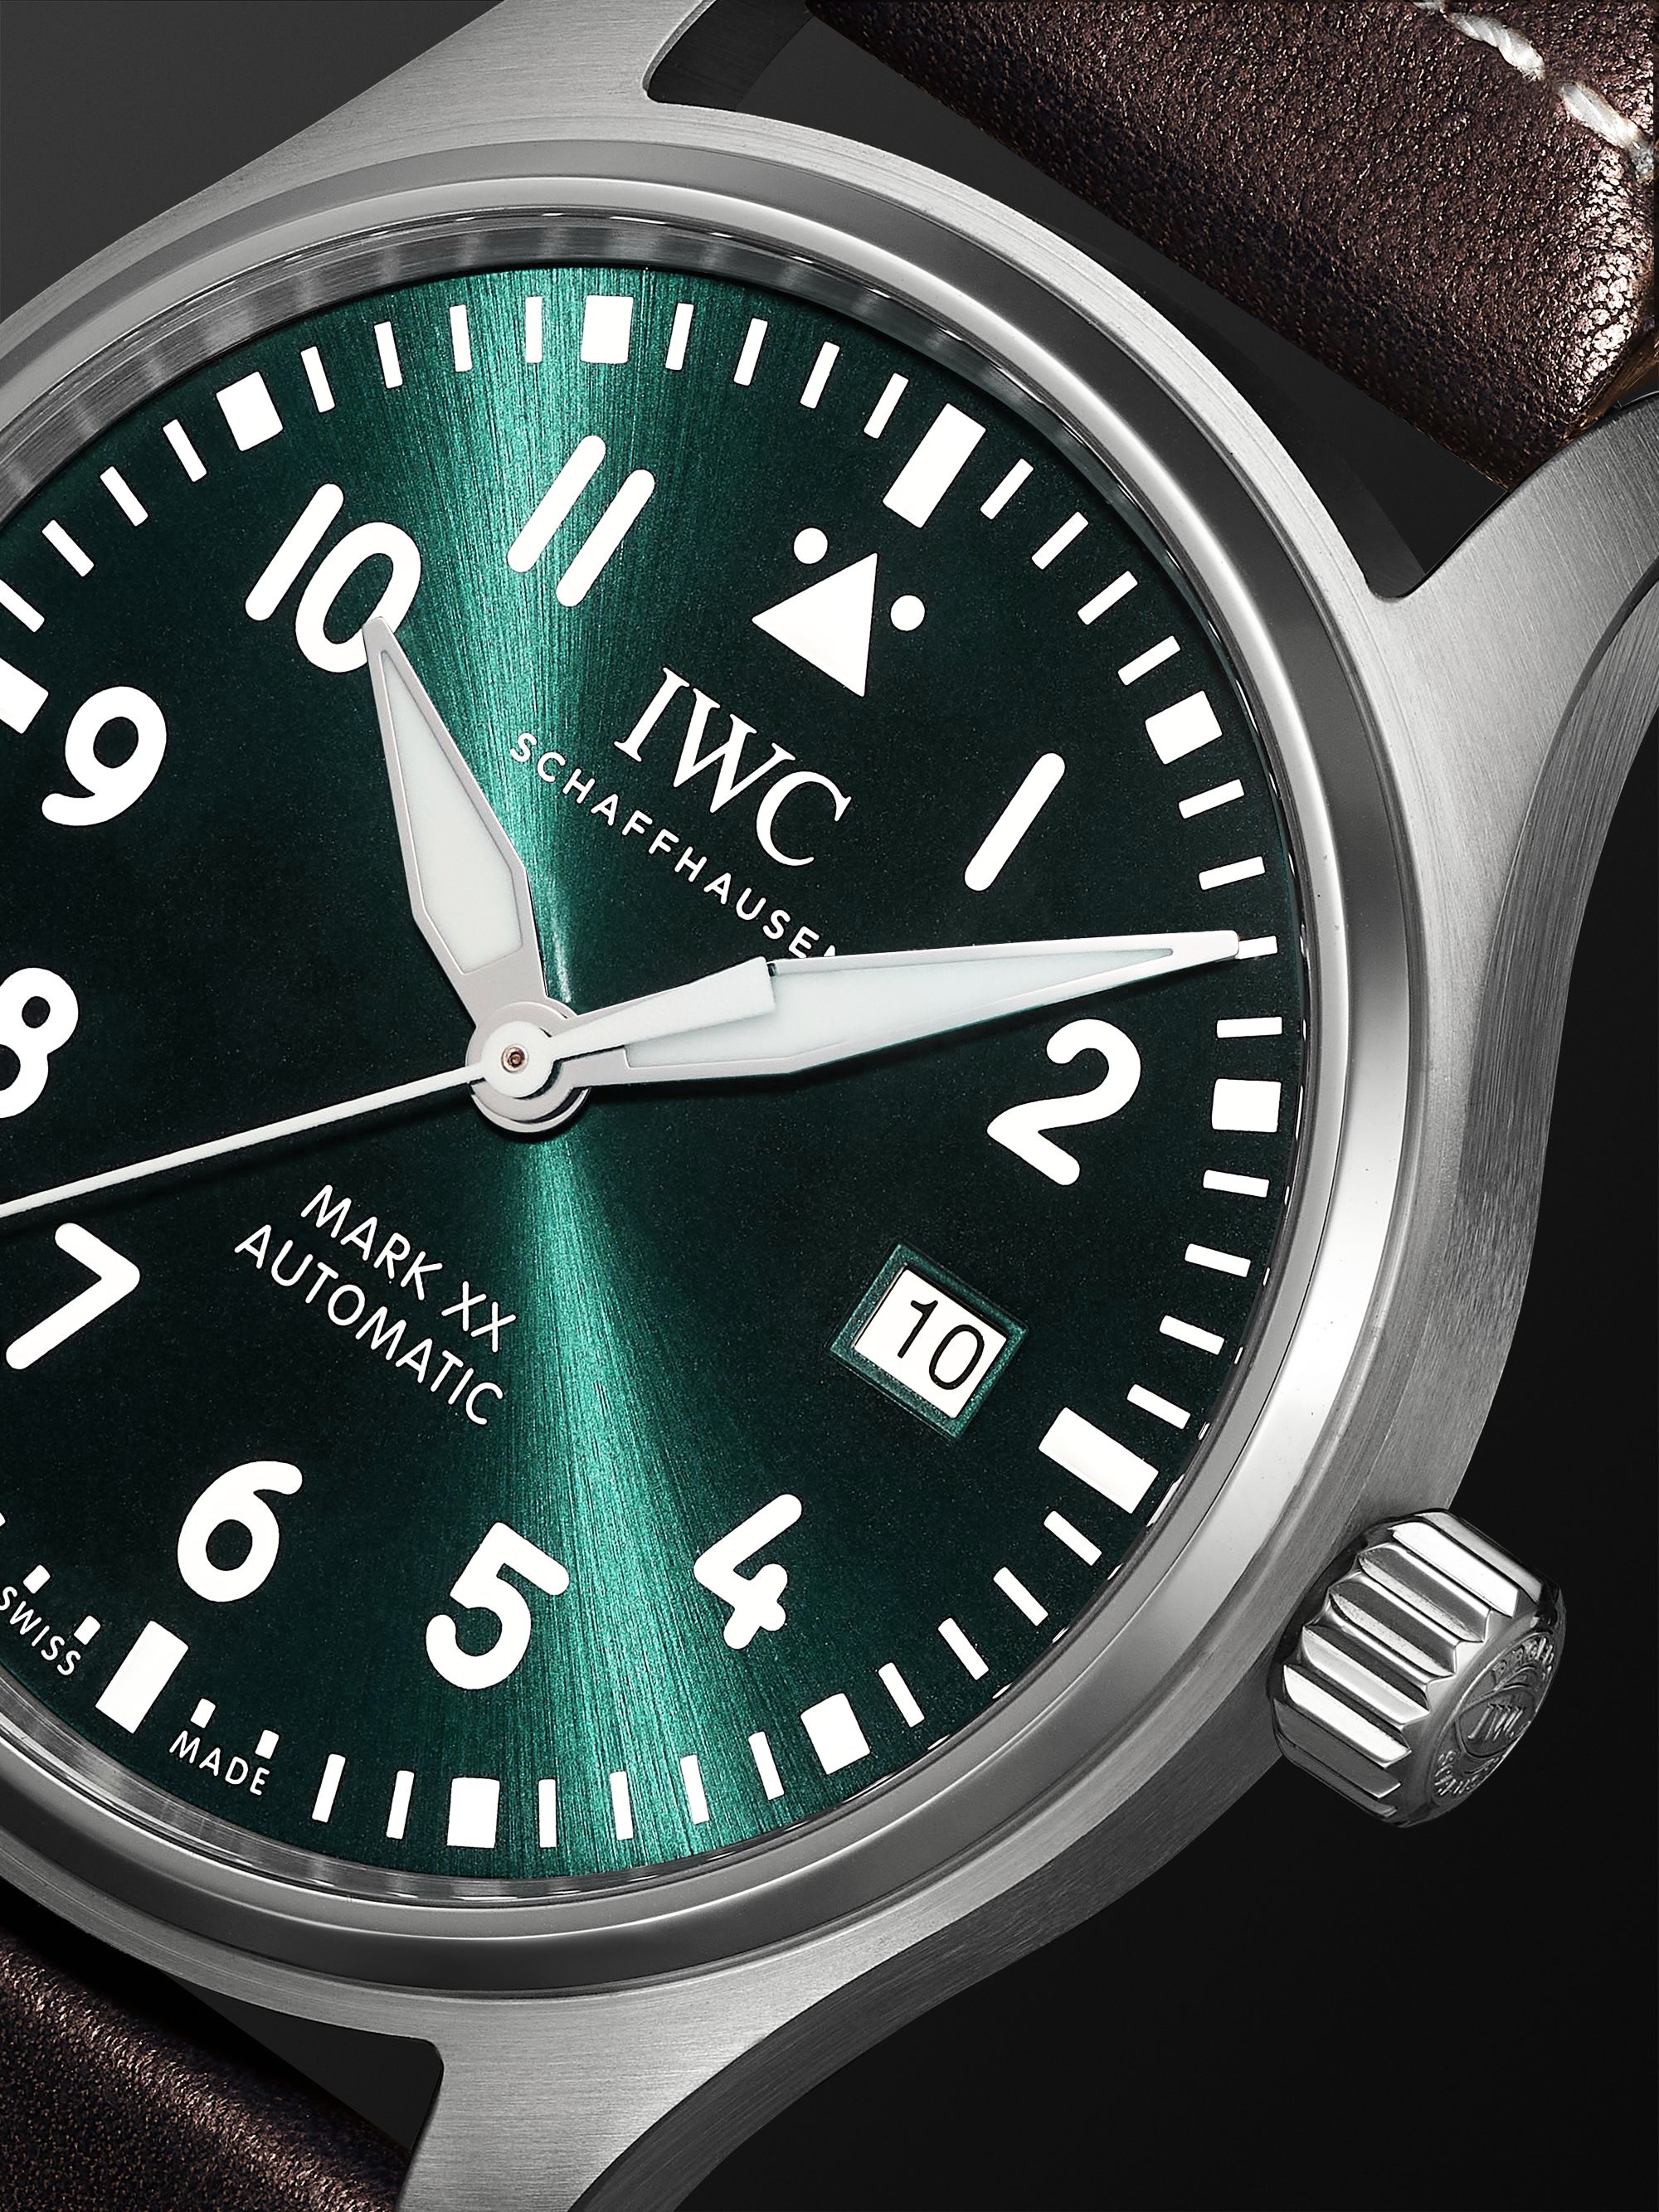 IWC SCHAFFHAUSEN Pilot's Mark XX Automatic 40mm Stainless Steel and Leather Watch, Ref. No. IW328201